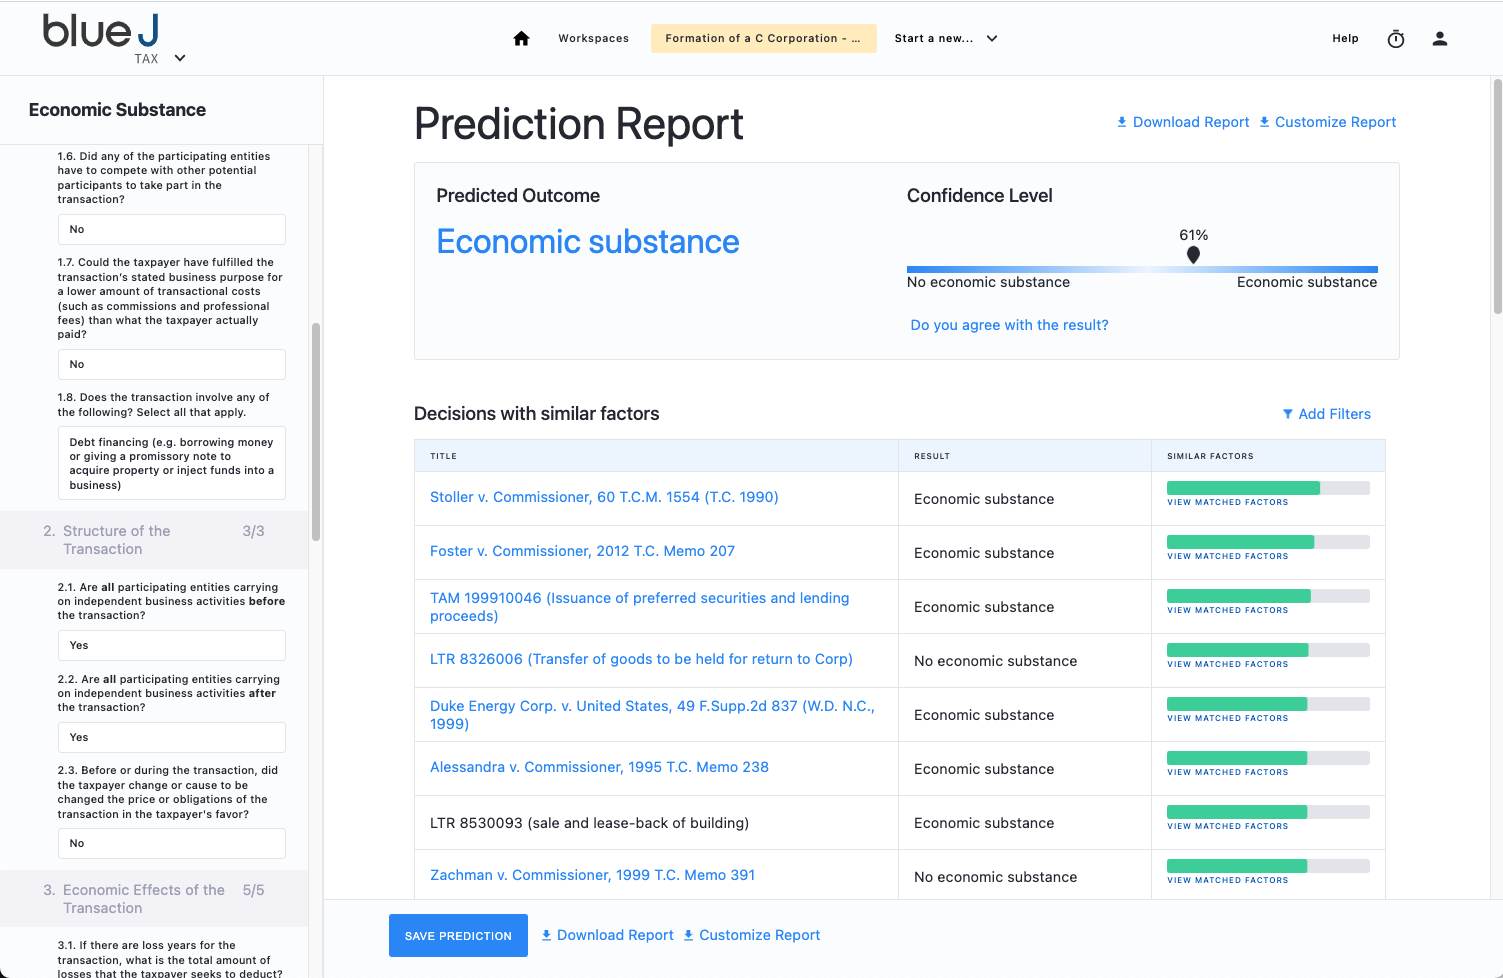 Predict client outcomes based on factors, analyze weights factors, find all relevant decisions, and quantify certainty of client position with data-driven insights.